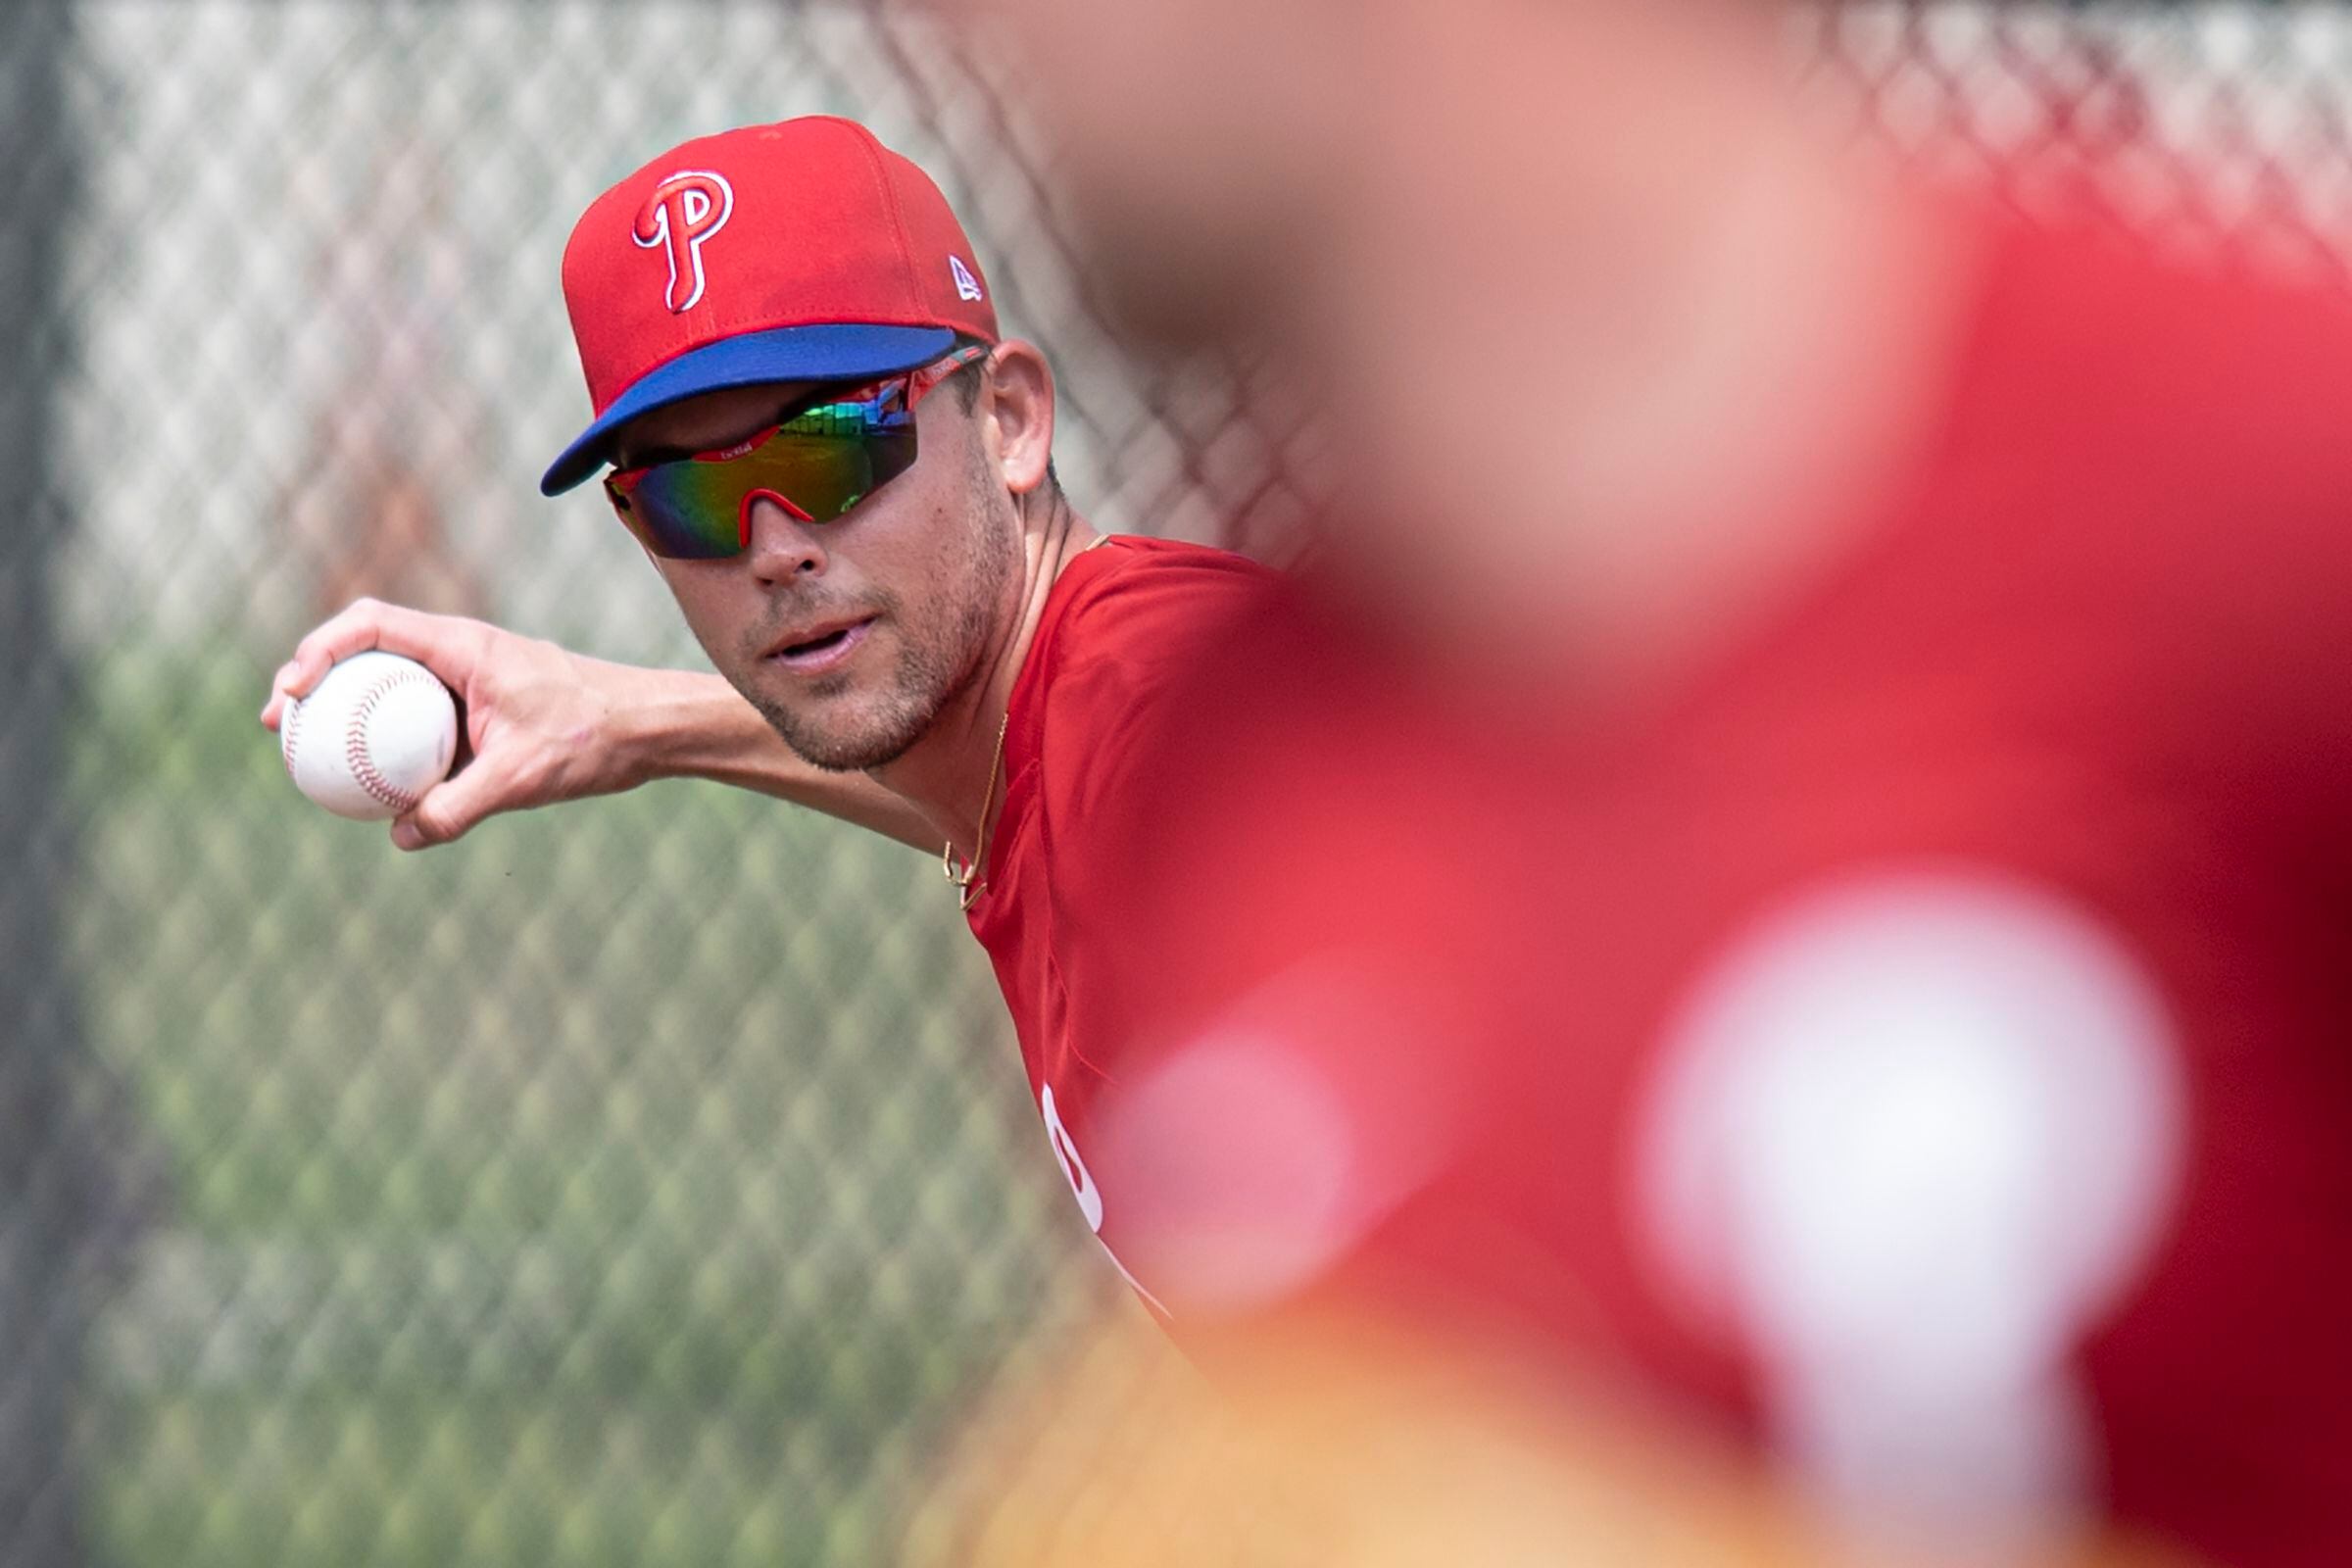 Scott Kingery was poised to be the Phillies' next star. Now he hopes to  make the most of one more chance.